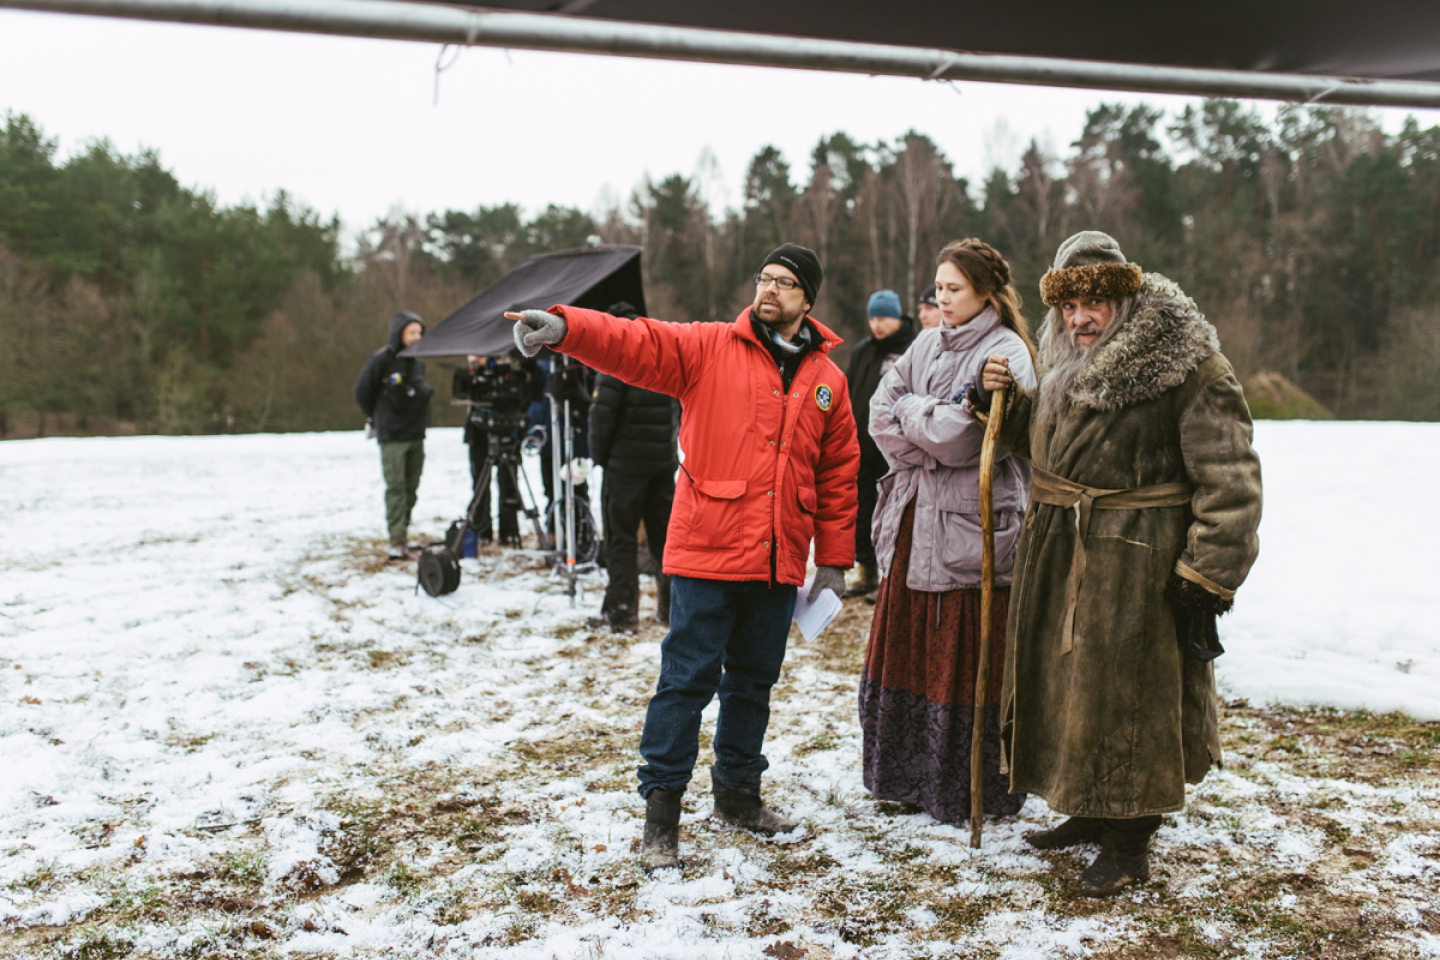 Outdoor winter film shoot with camera equipment, in foreground 1 crew member points next to 2 actors in large coats 